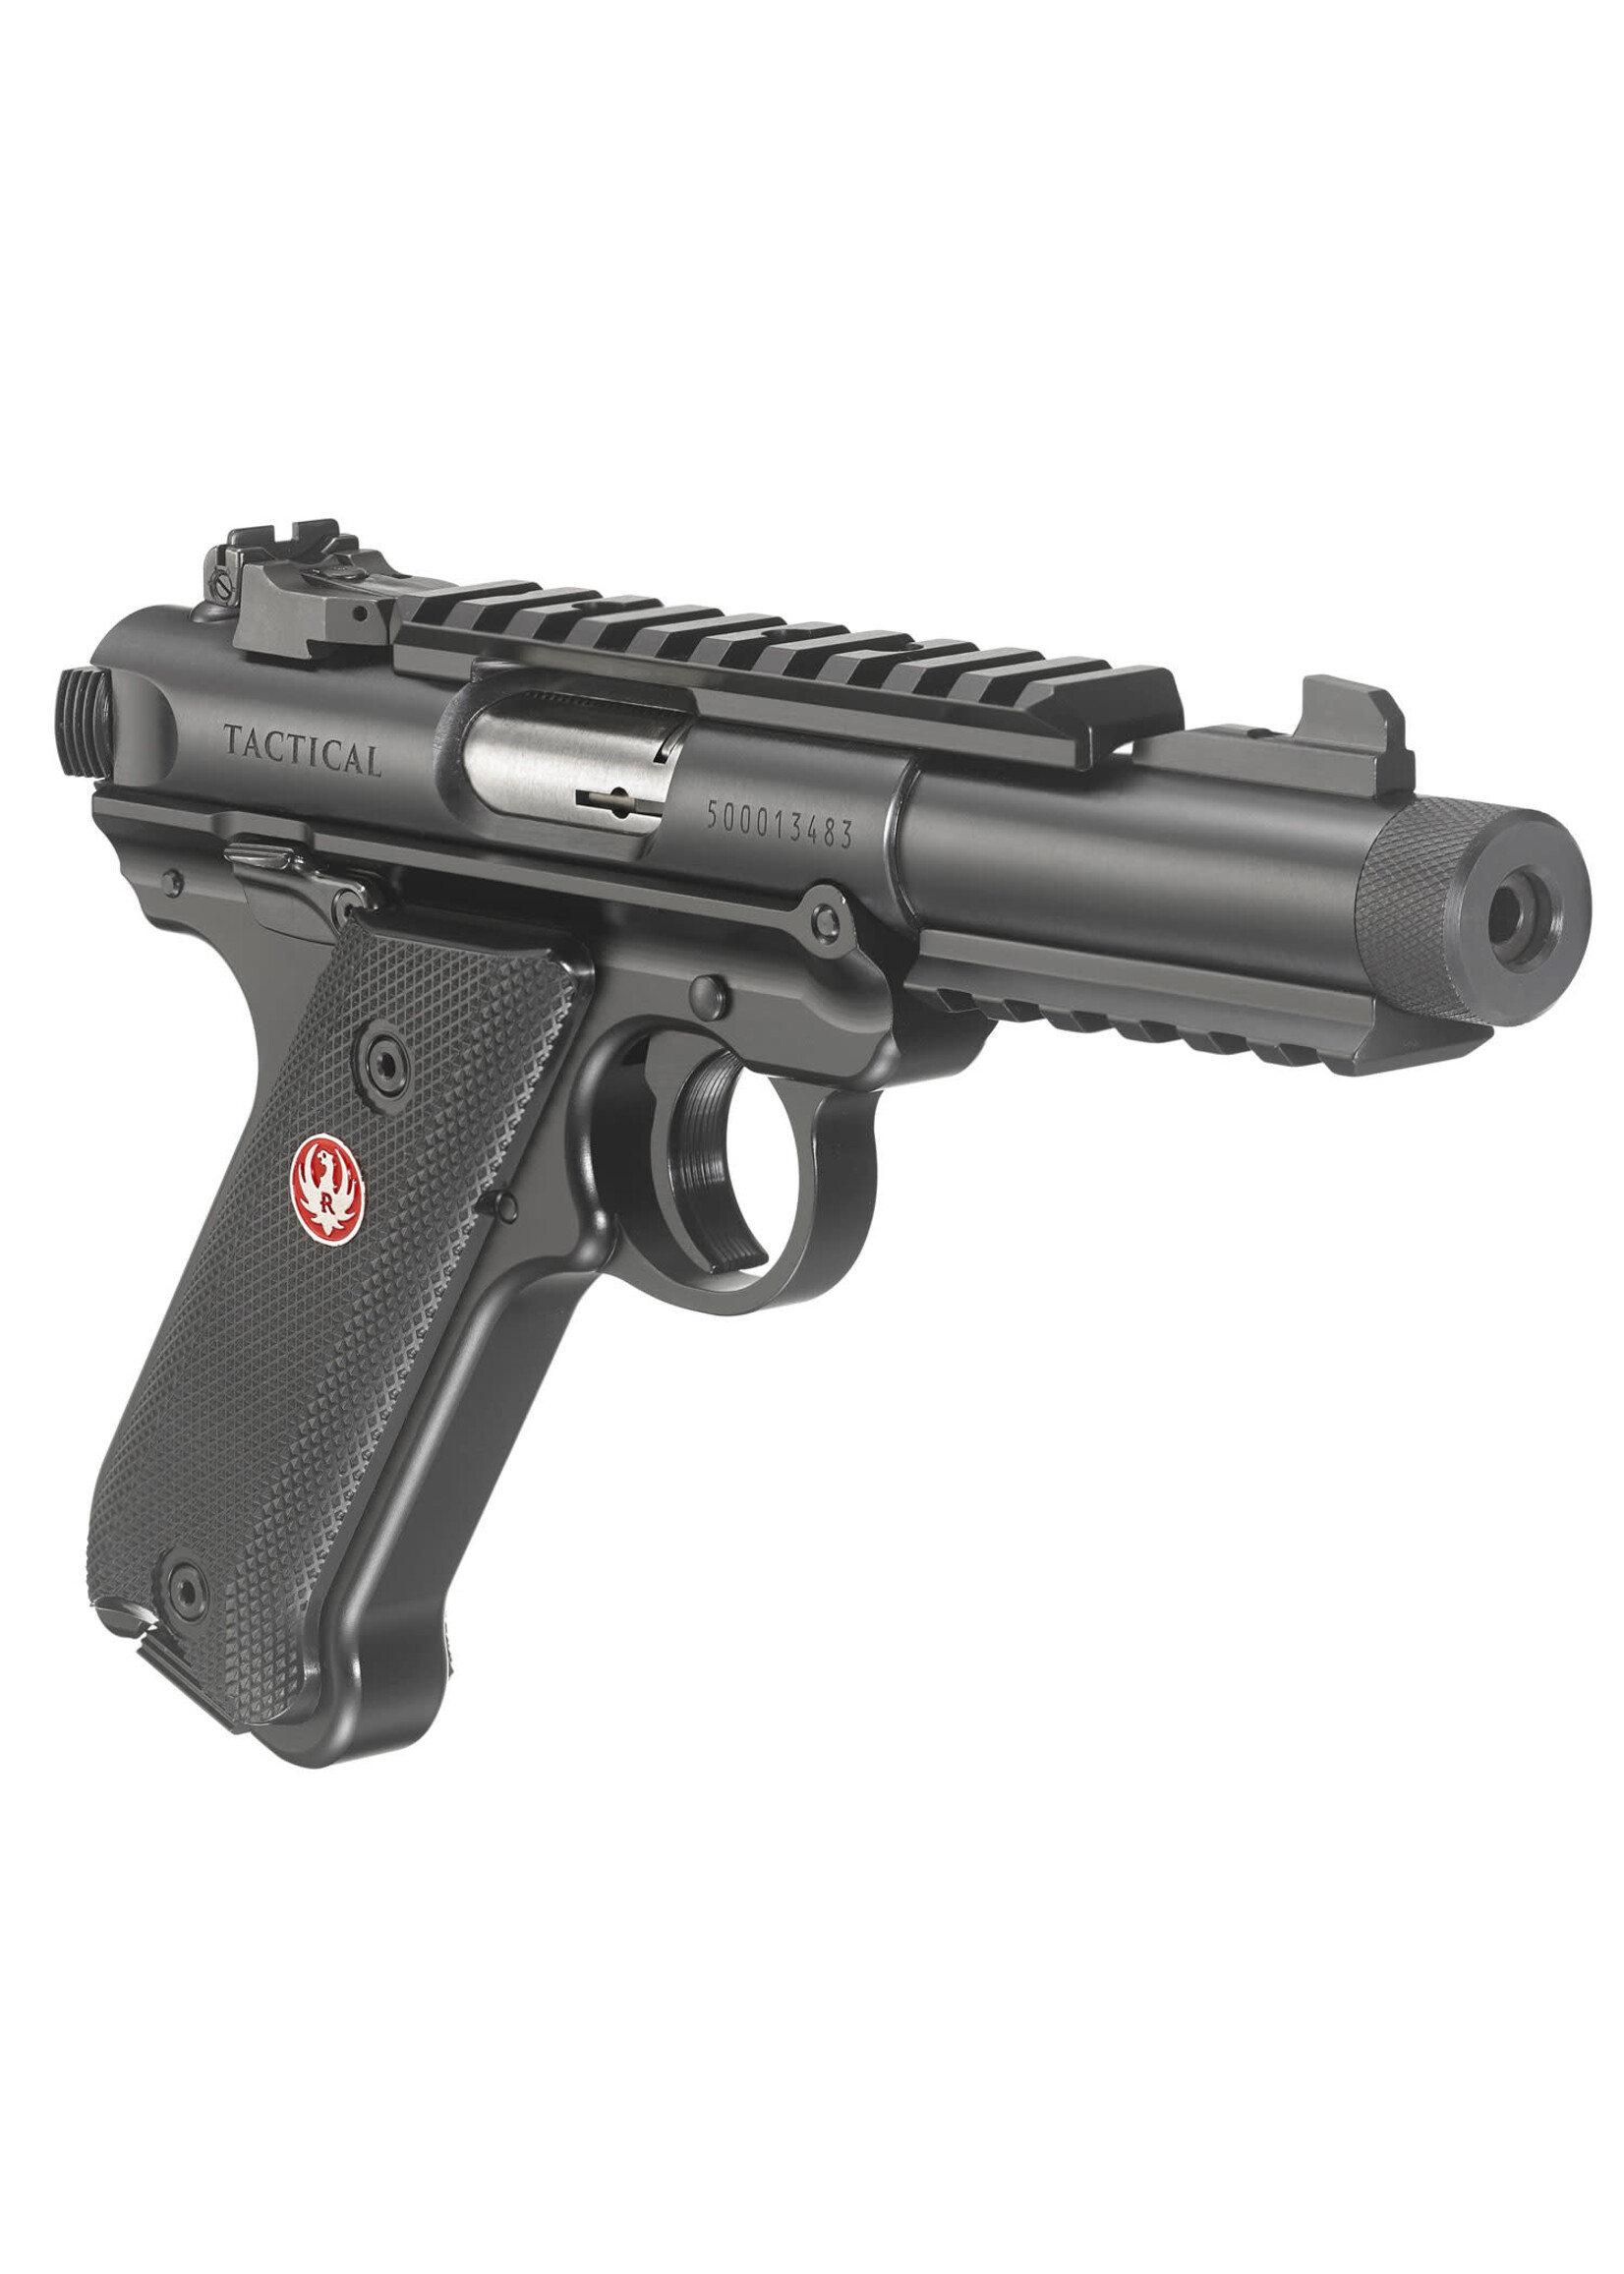 Ruger Ruger 40150 Mark IV Tactical 22 LR 4.40" Threaded Barrel 10+1, Blued Blued Alloy Steel, Aluminum Grip Frame With Checkered Polymer Grip, Top & Bottom Picatinny Rails, Ambidextrous Manual Safety, Optics Ready